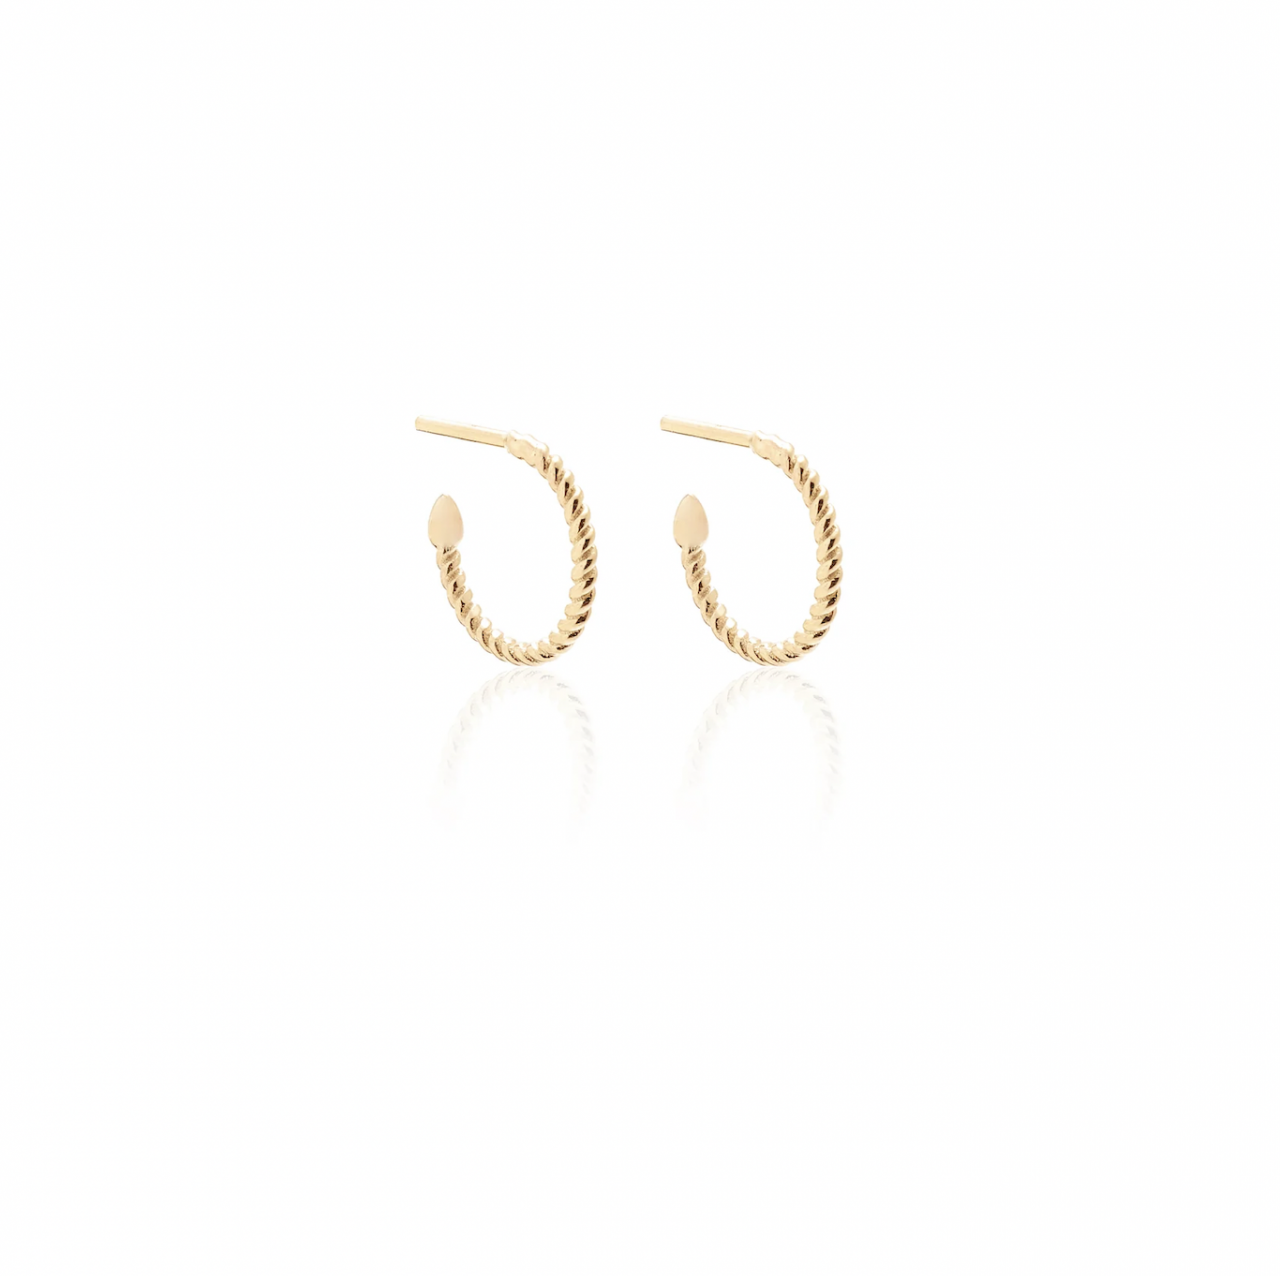 Silk and Steel Mini Rope Hoops in 14ct Plated Gold